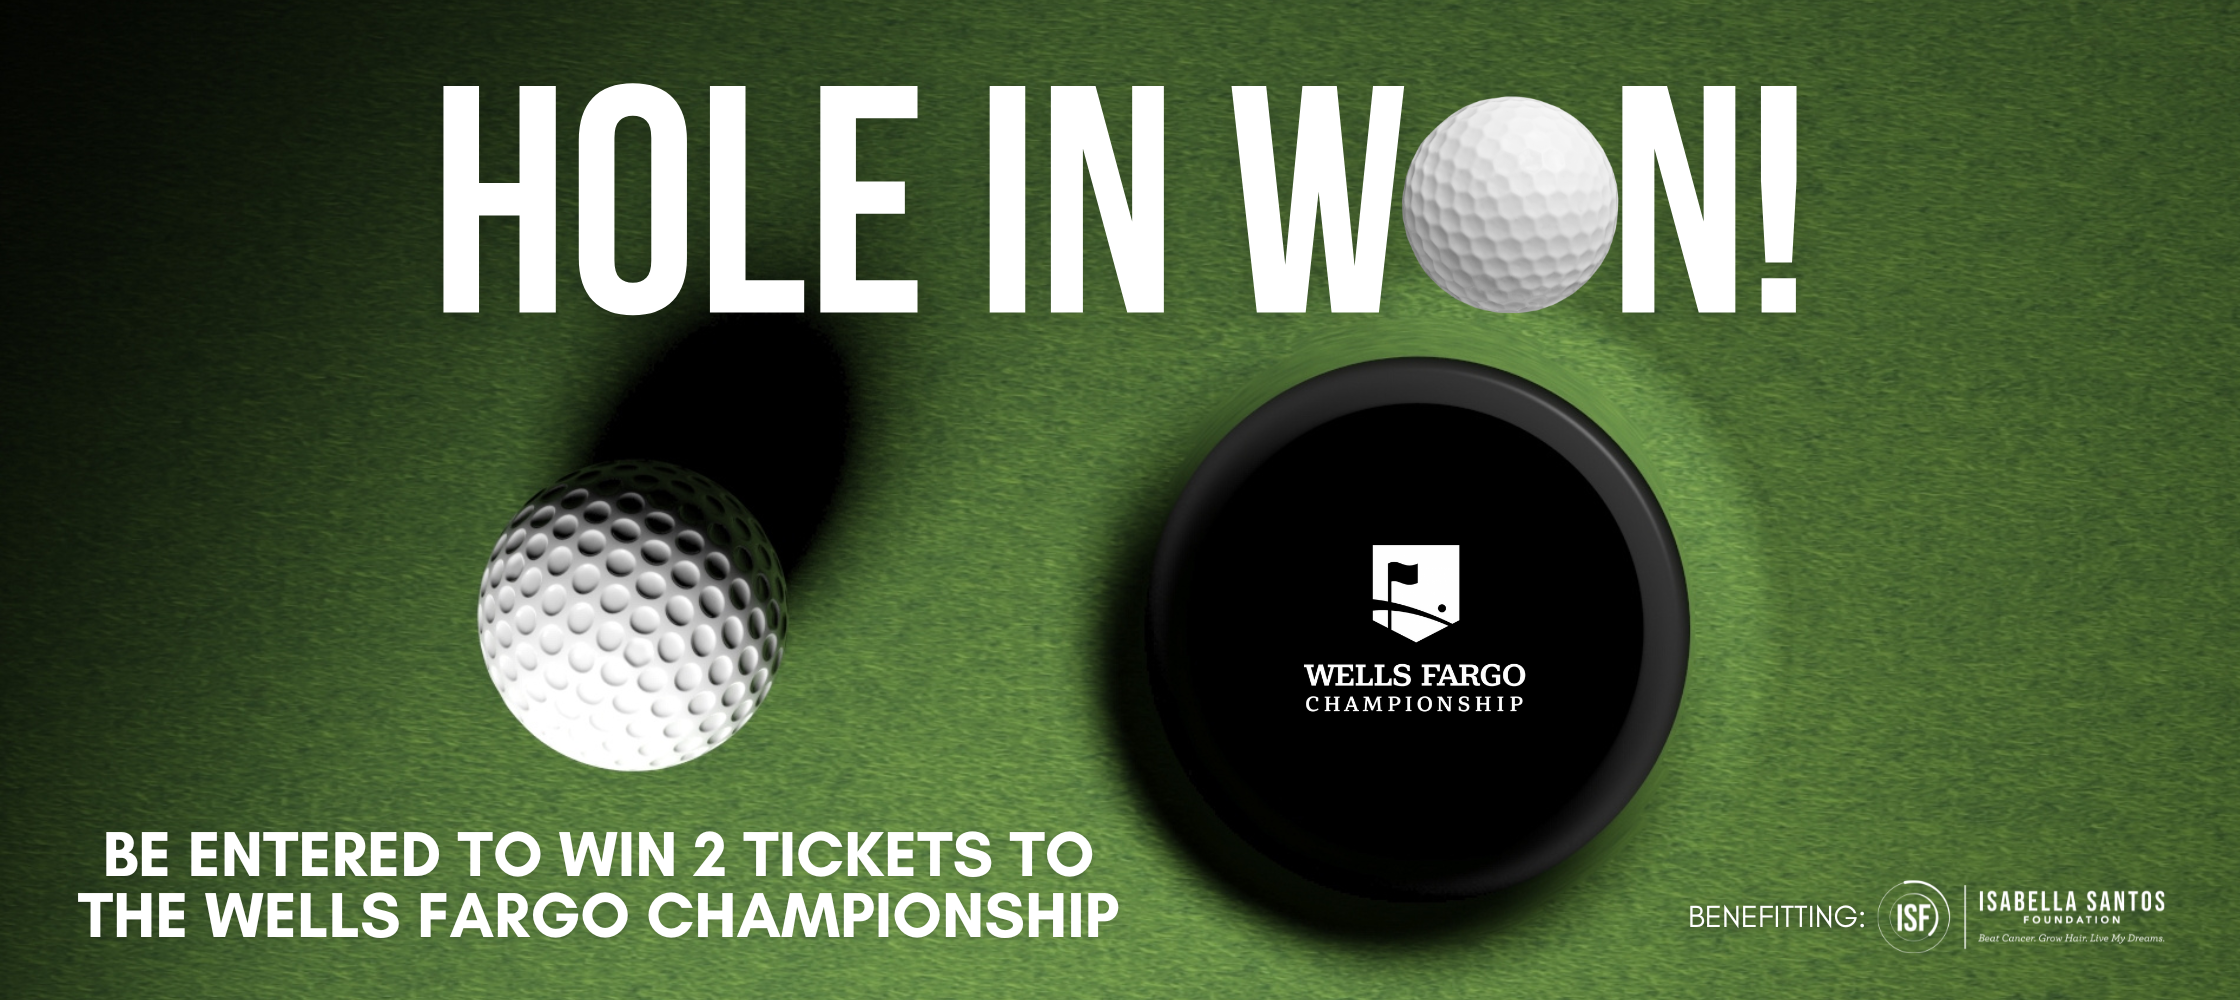 Hole in Won Golf Contest